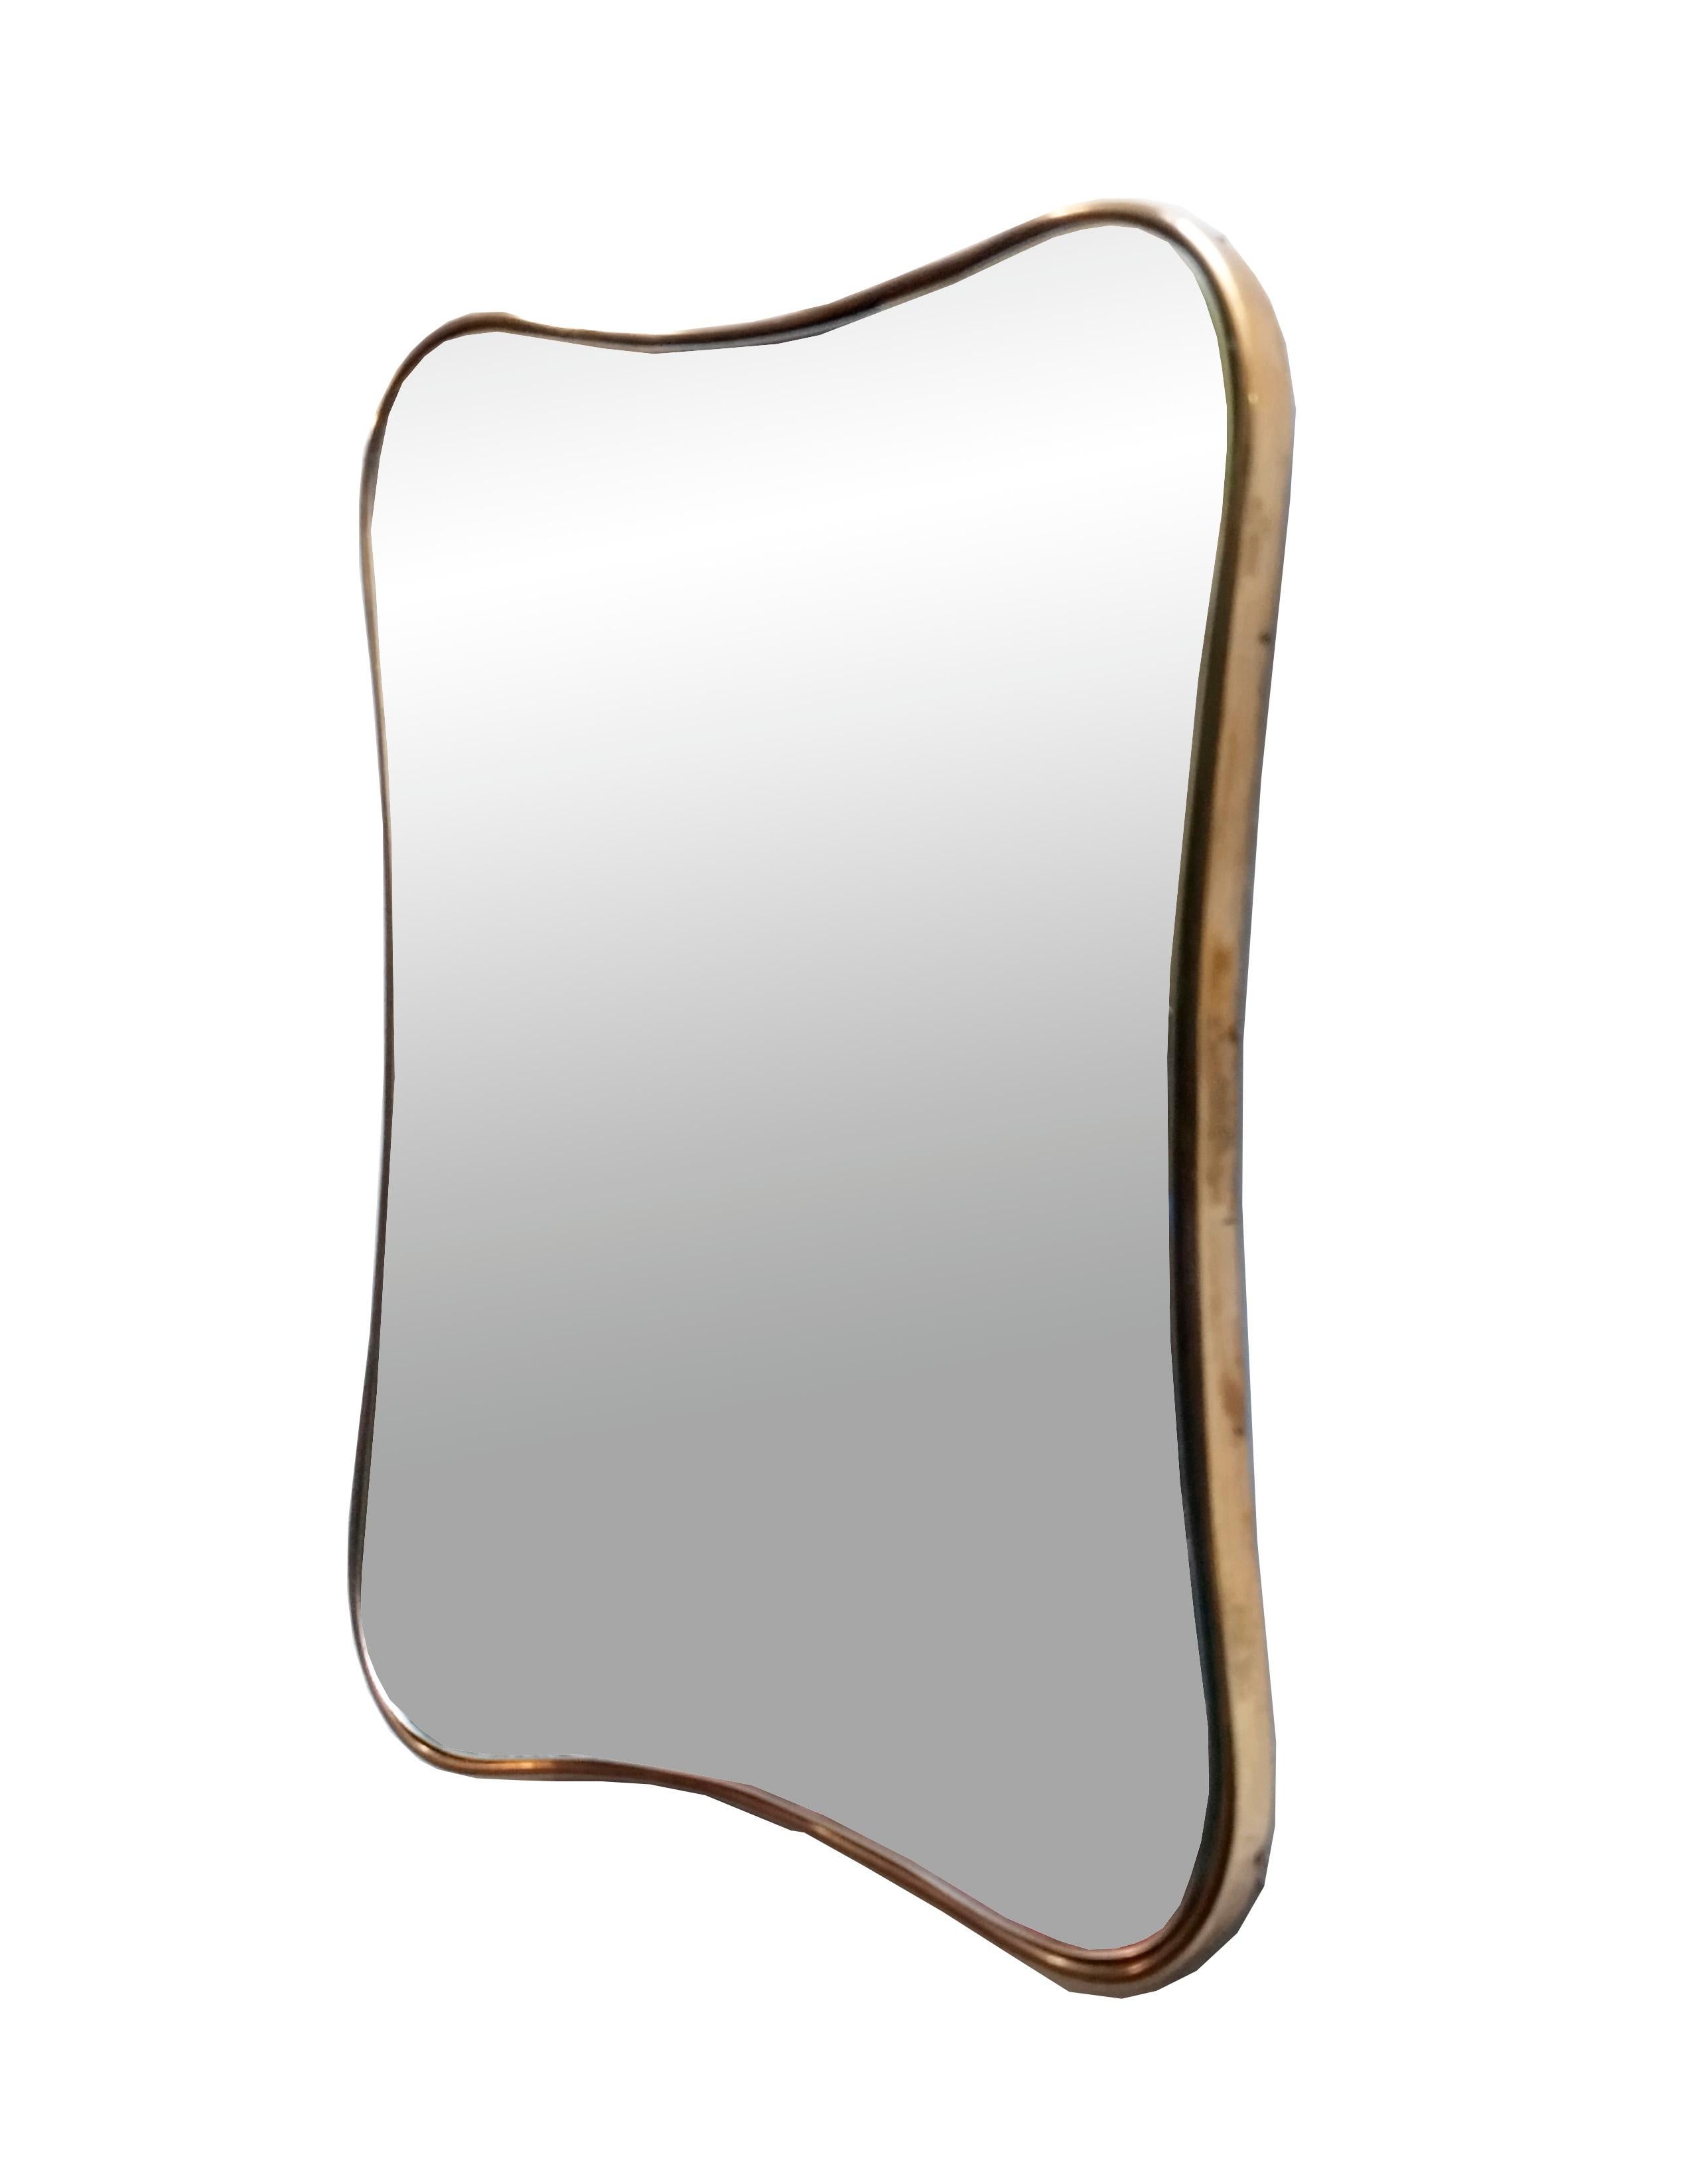 Shaped mirror with brass frame, 1960s. Showing some minor signs of time, the mirror is original to the period.
 